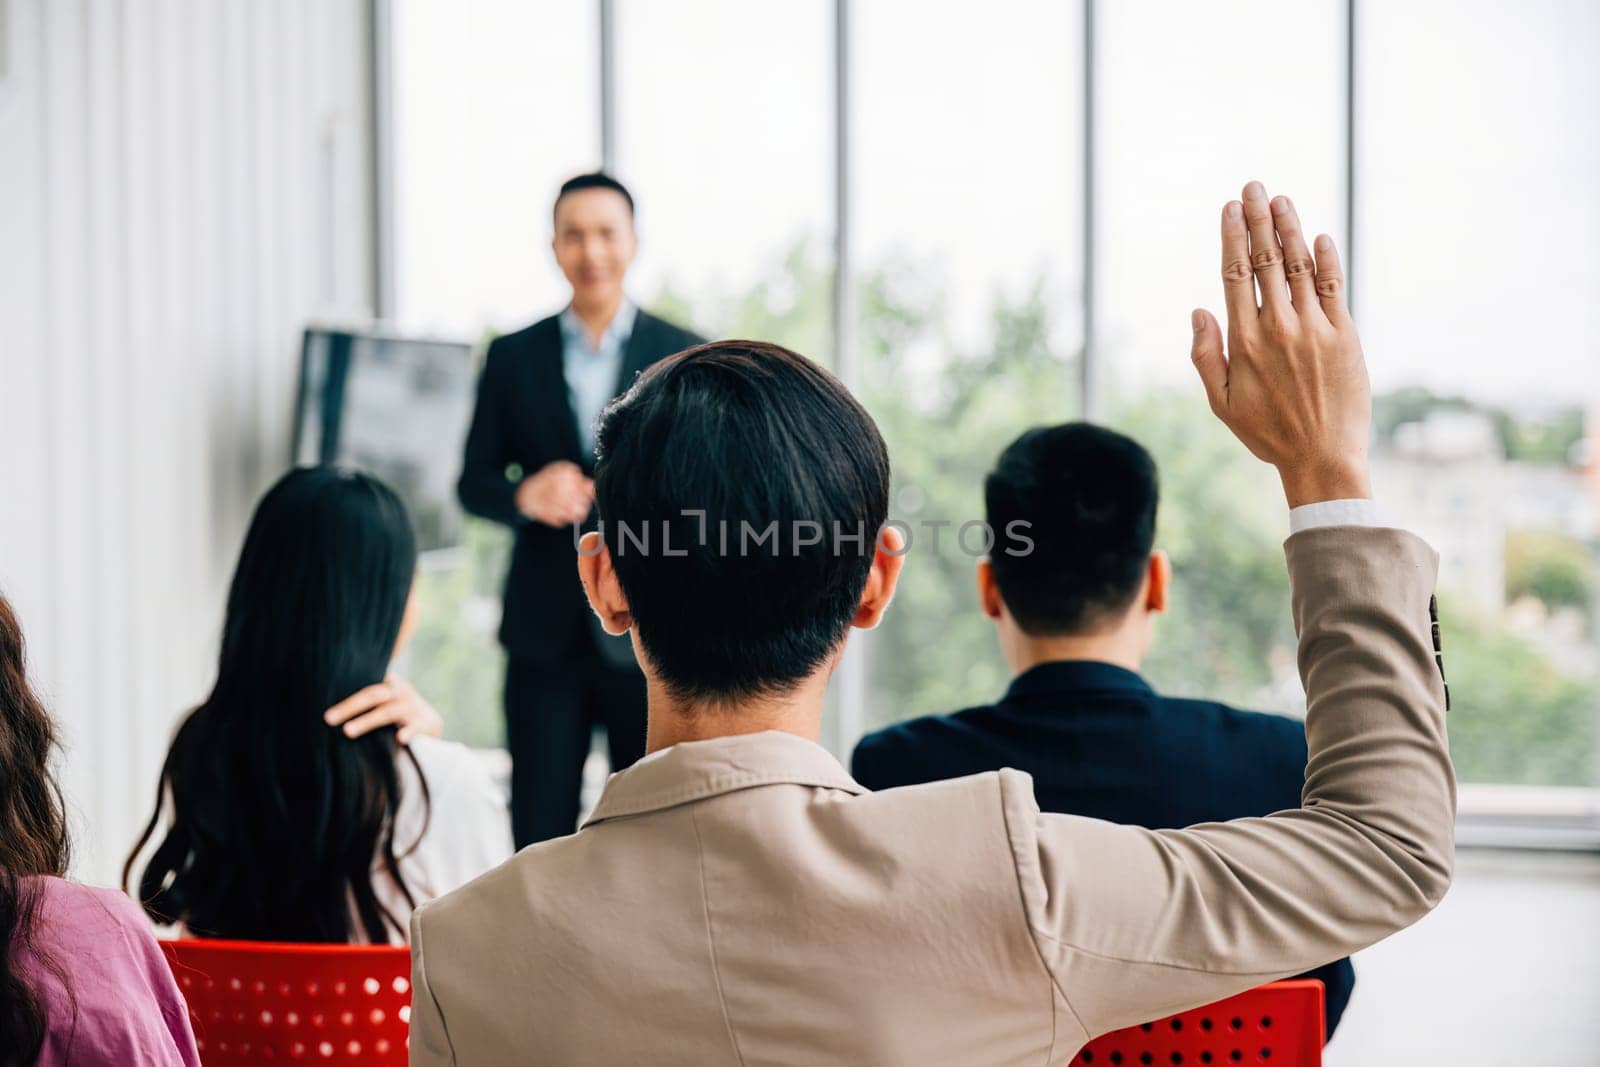 At a conference, hands are raised for questions, underlining the active participation of the audience. A diverse group collaborates in a workshop or seminar, emphasizing teamwork and discussion.